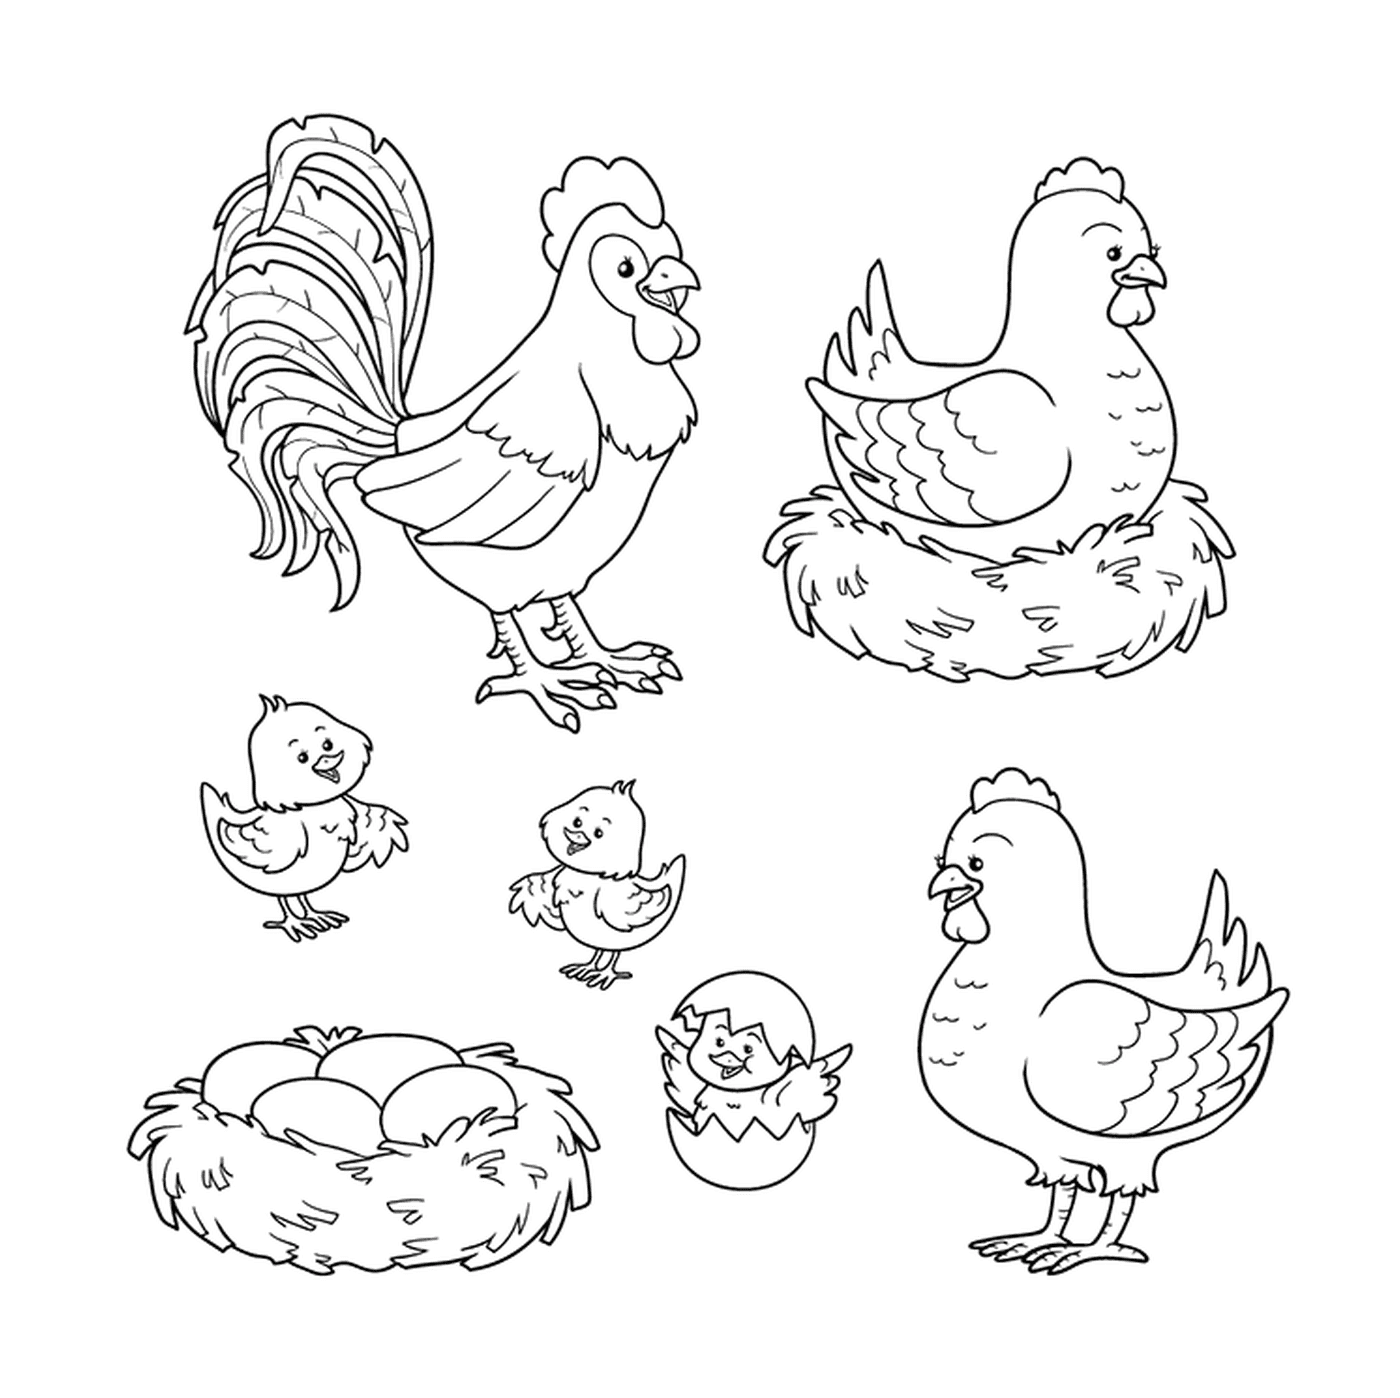  Chicken, cock, chicks together 